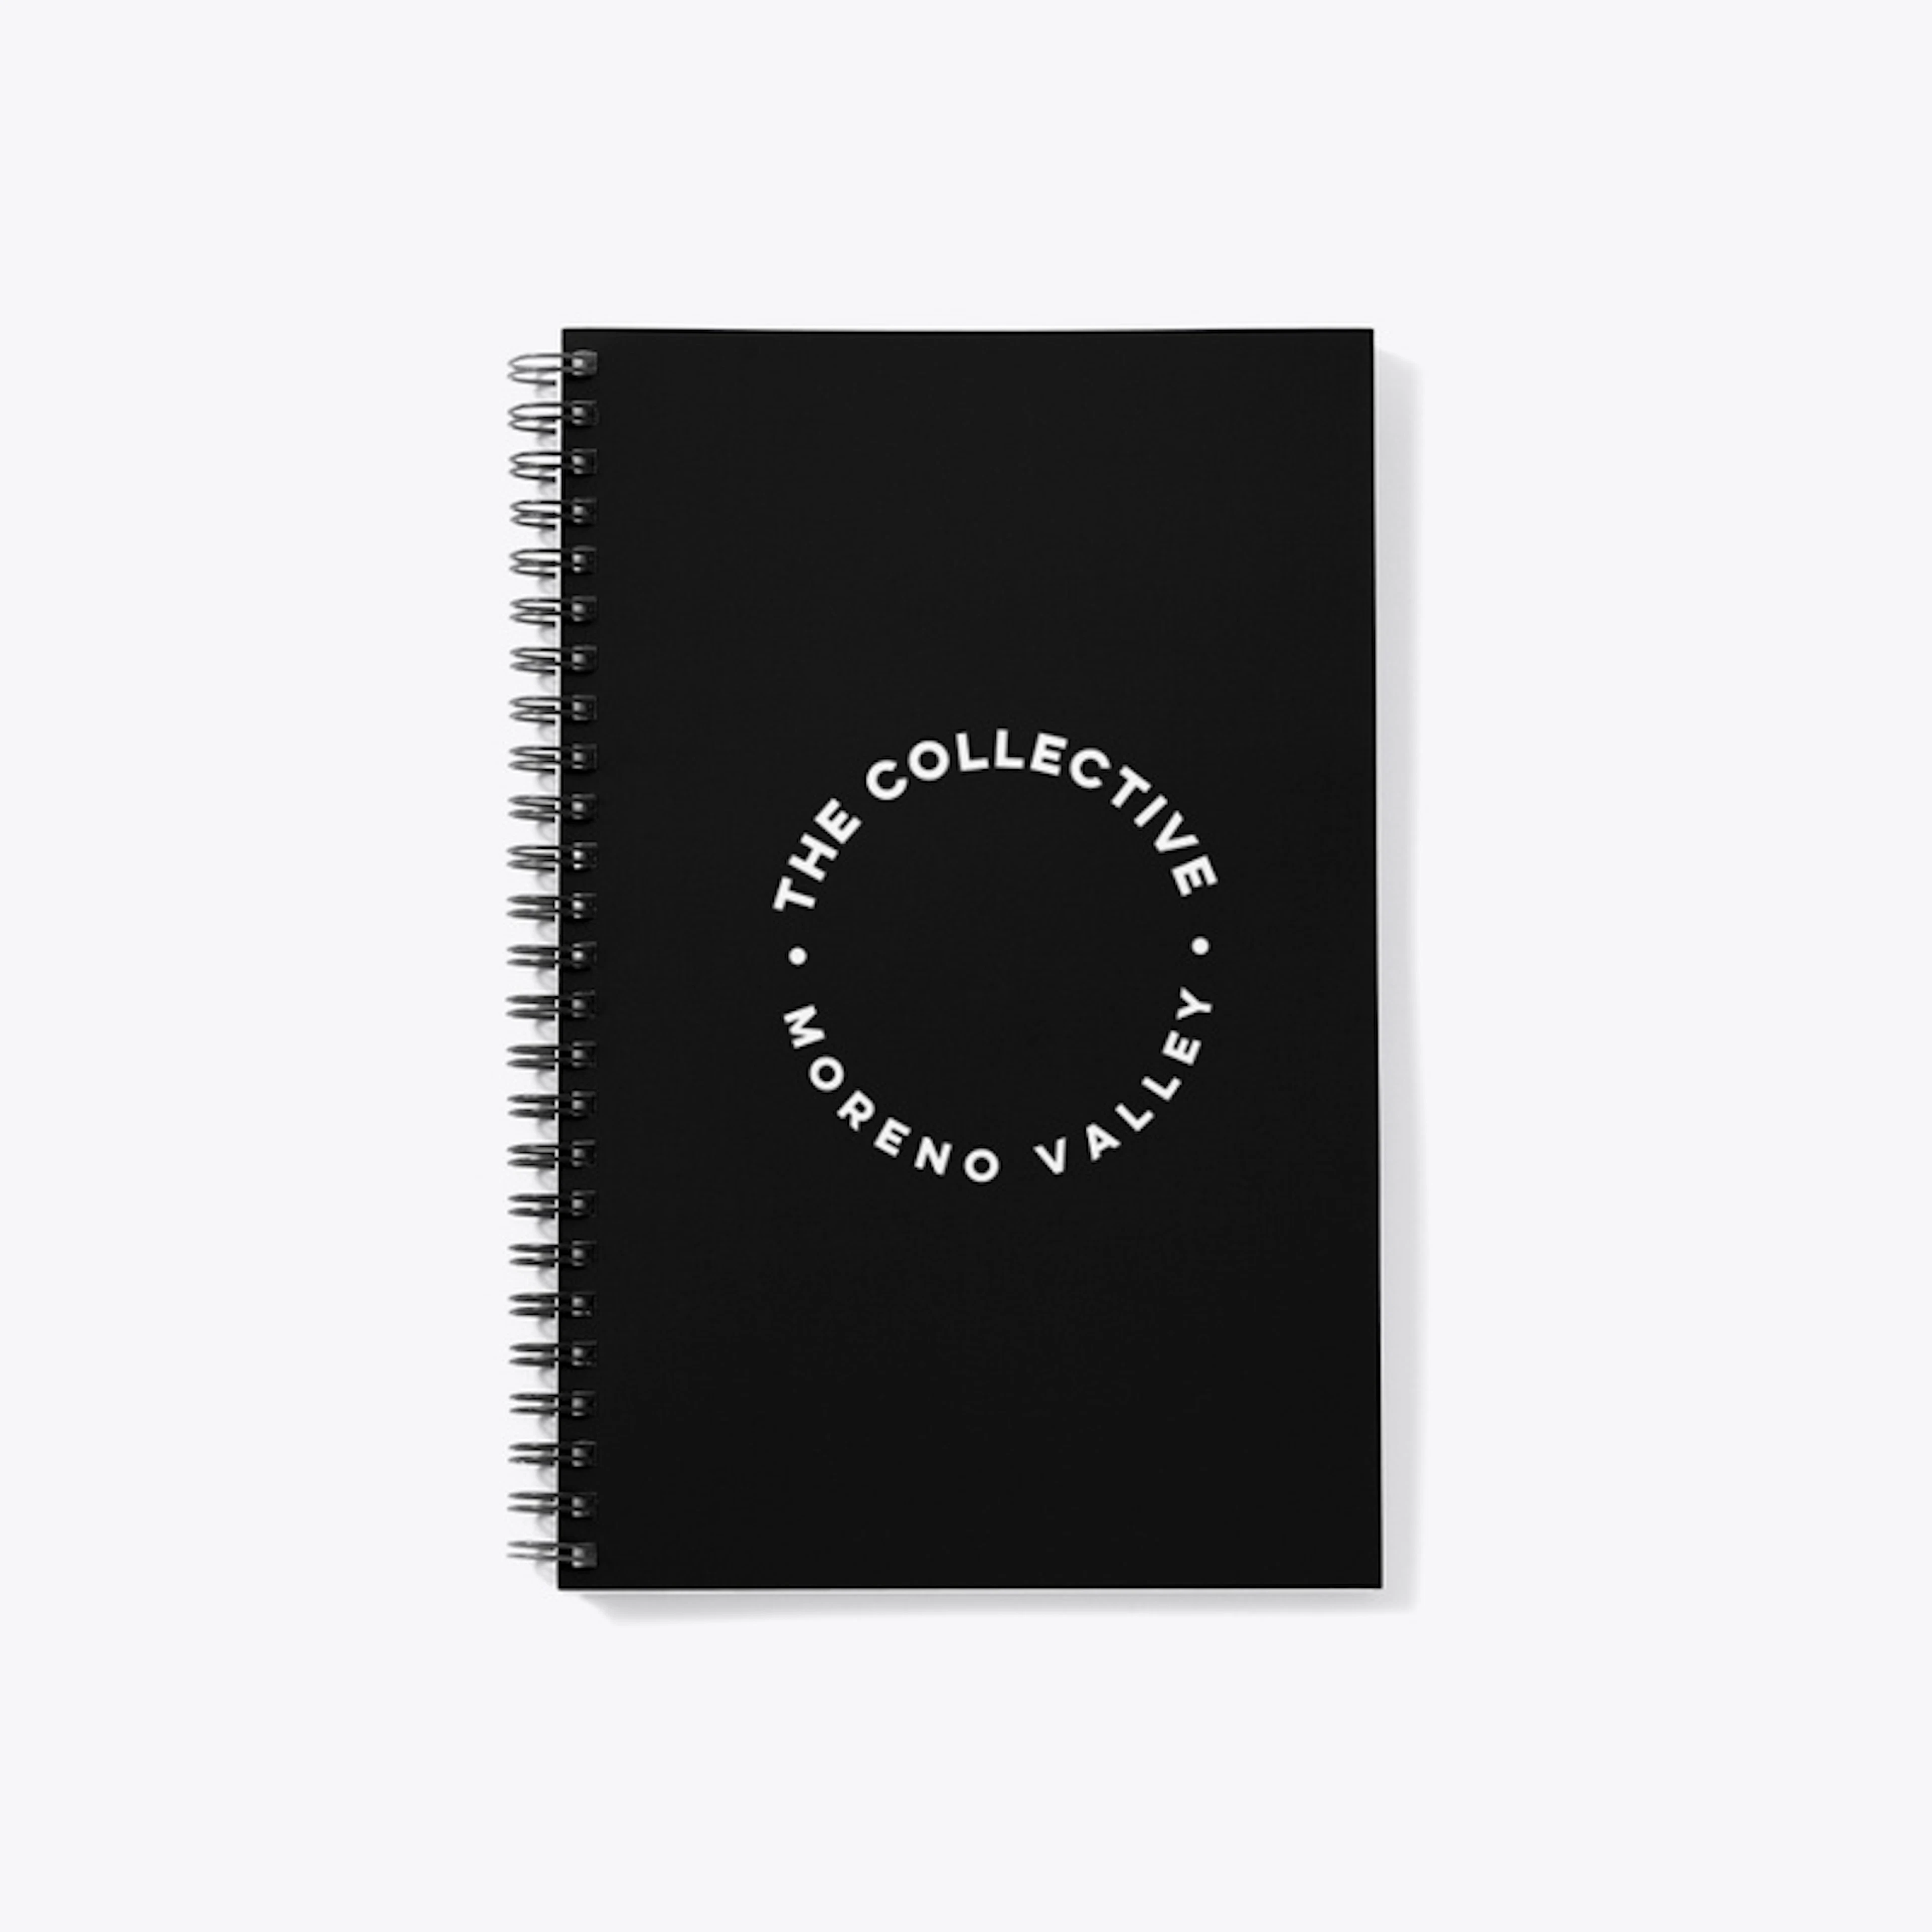 The Collective Notebook